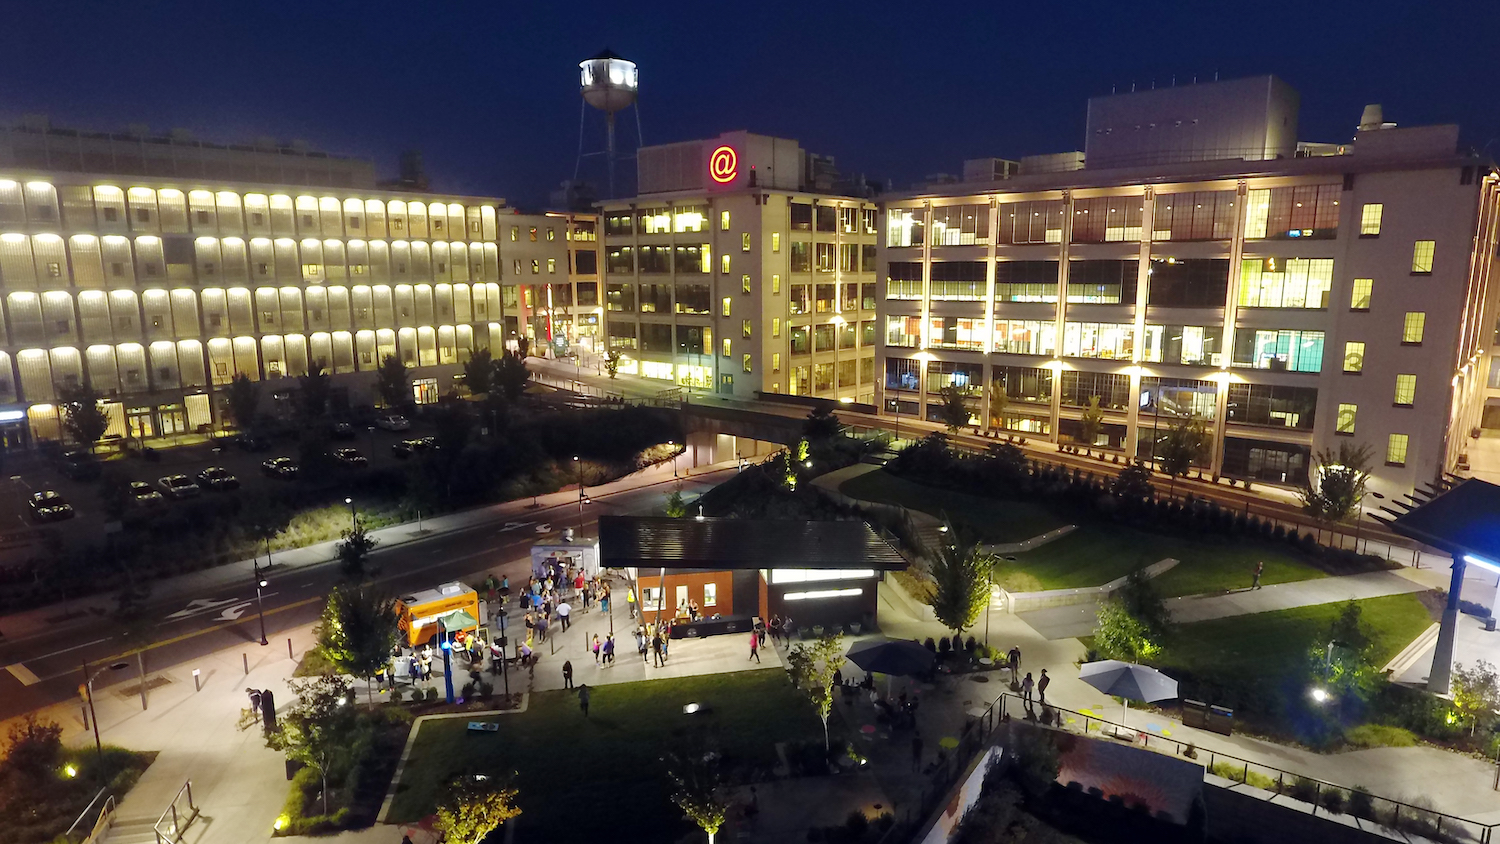 Food trucks line up at Bailey Park at night in the Innovation Quarter.